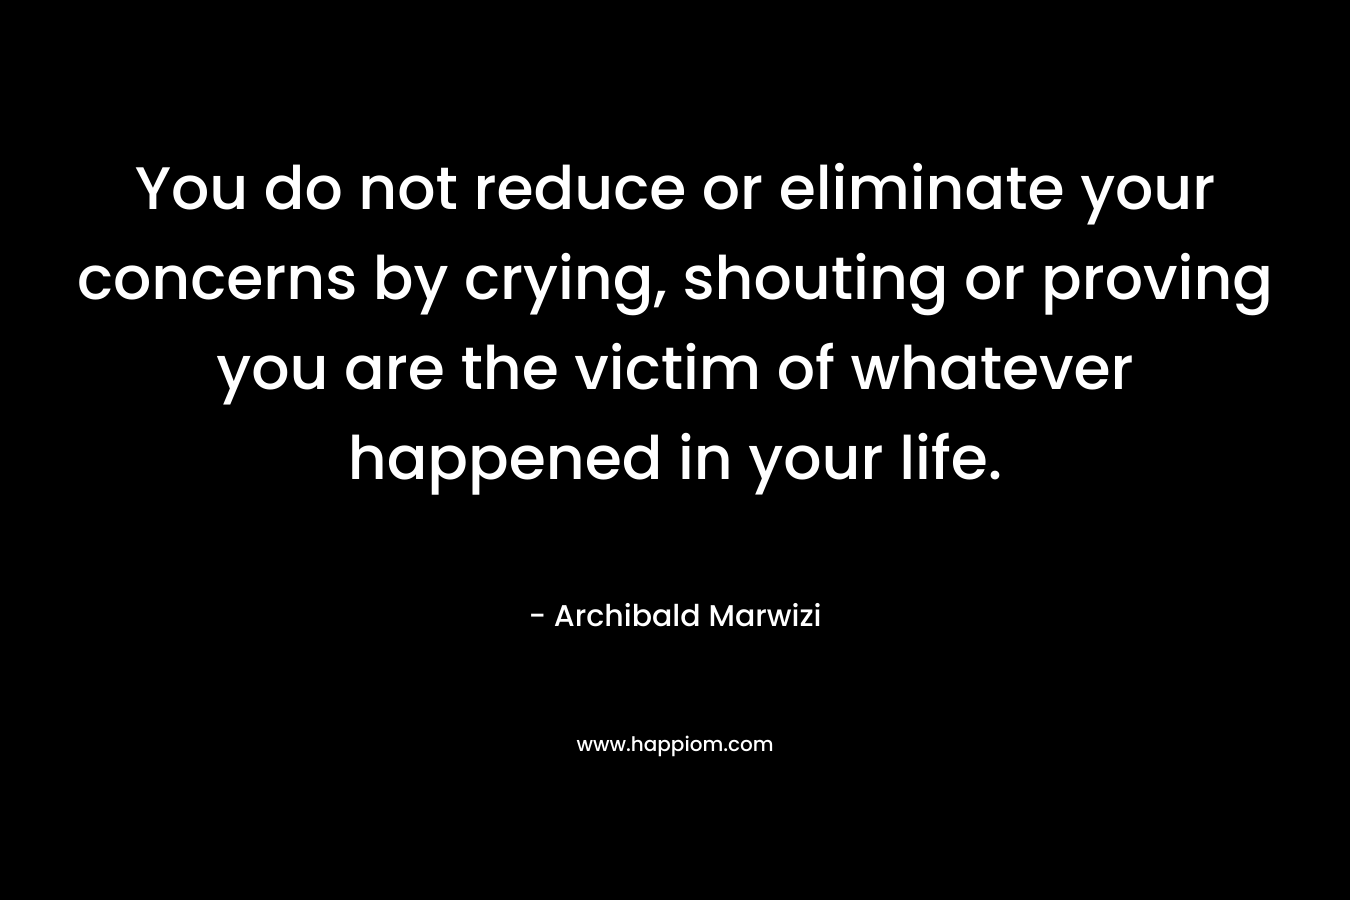 You do not reduce or eliminate your concerns by crying, shouting or proving you are the victim of whatever happened in your life. – Archibald Marwizi